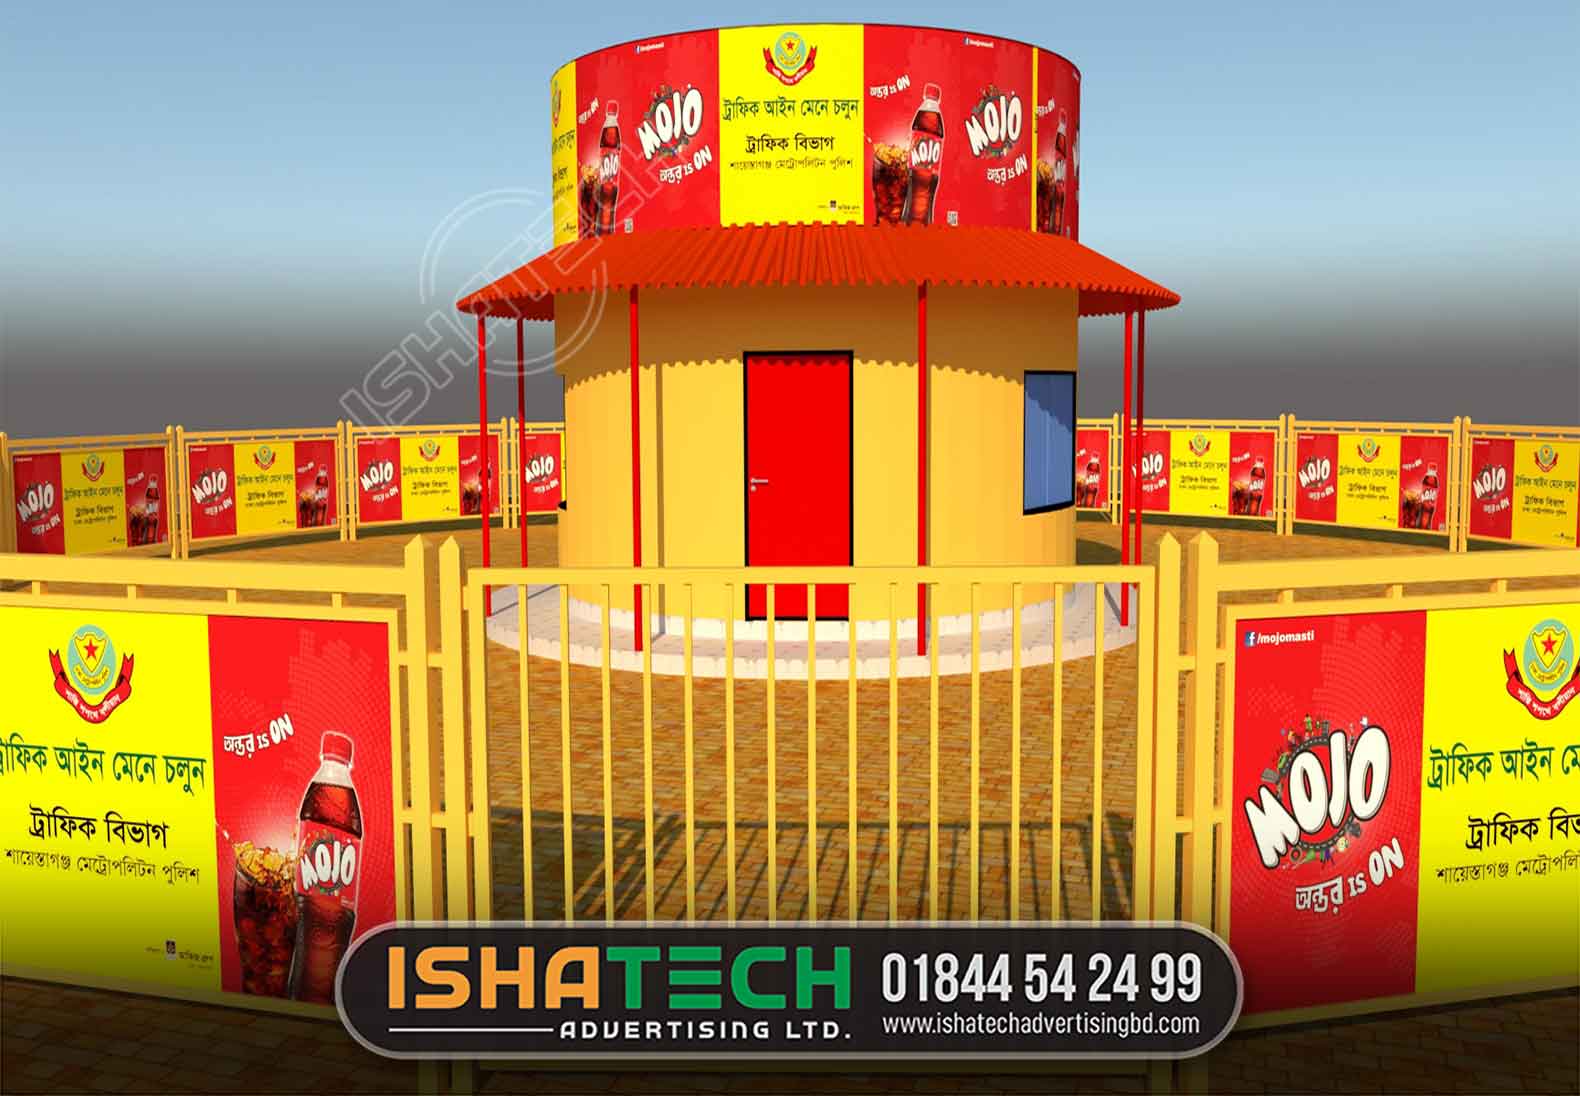 BEST POLICE BOX BRANDING FOR PRODUCTS ADVERTISEMENT IN DHAKA, BANGLADESH